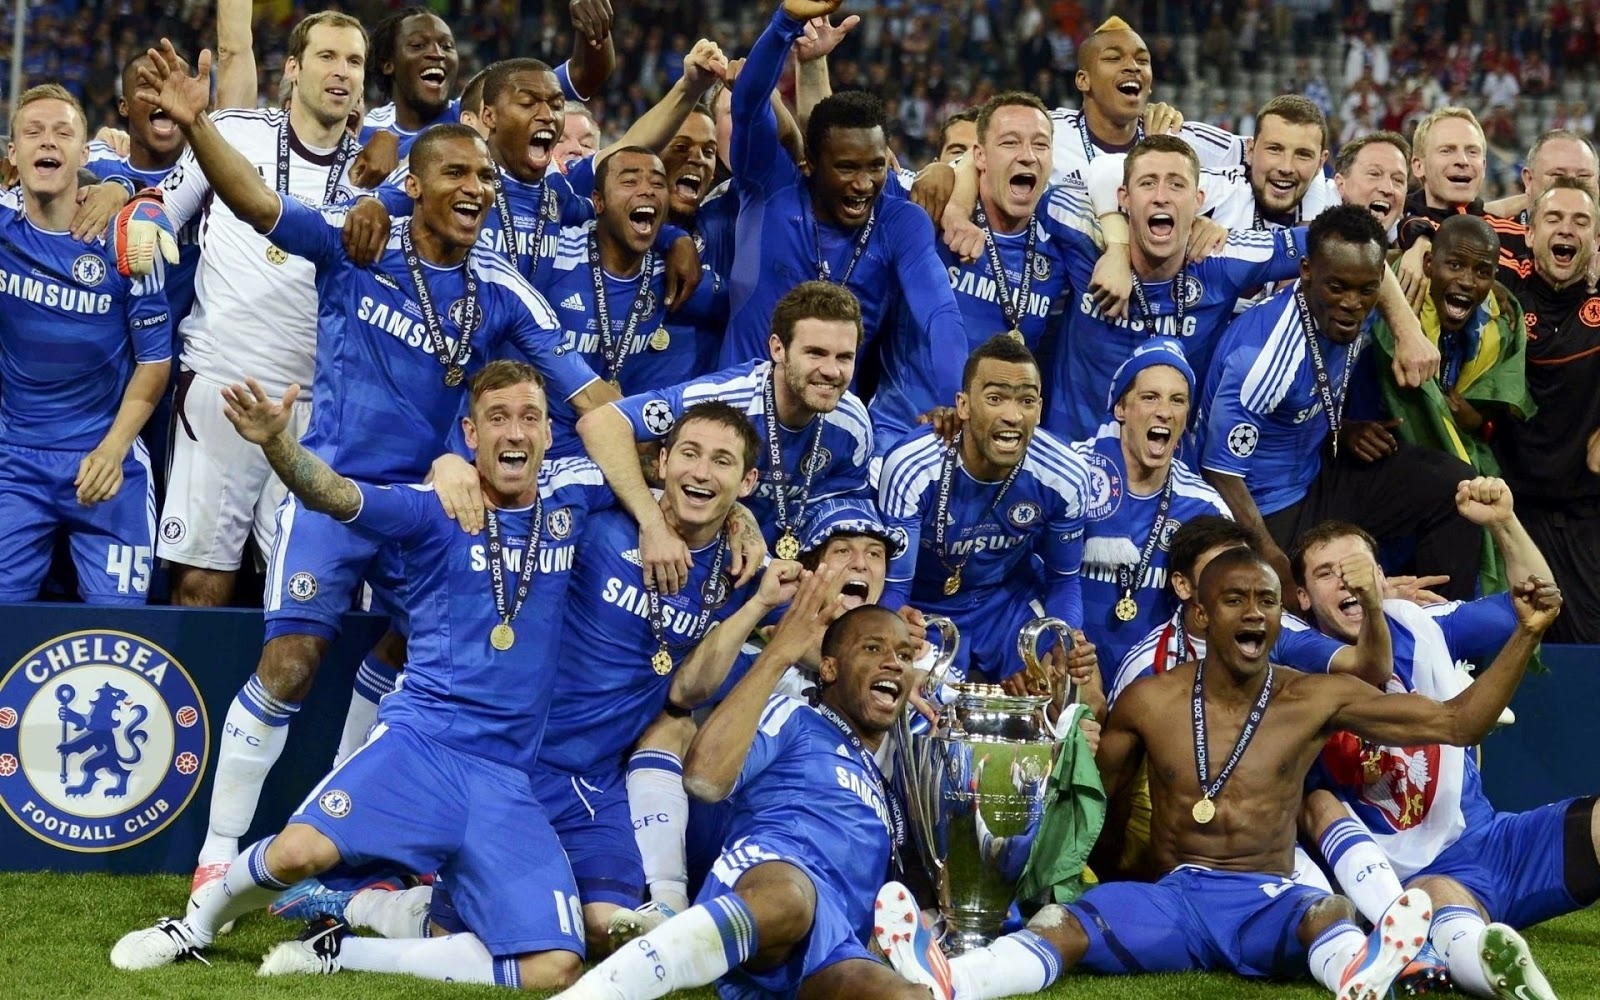 Champions Chelsea give perfect send-off to John Terry